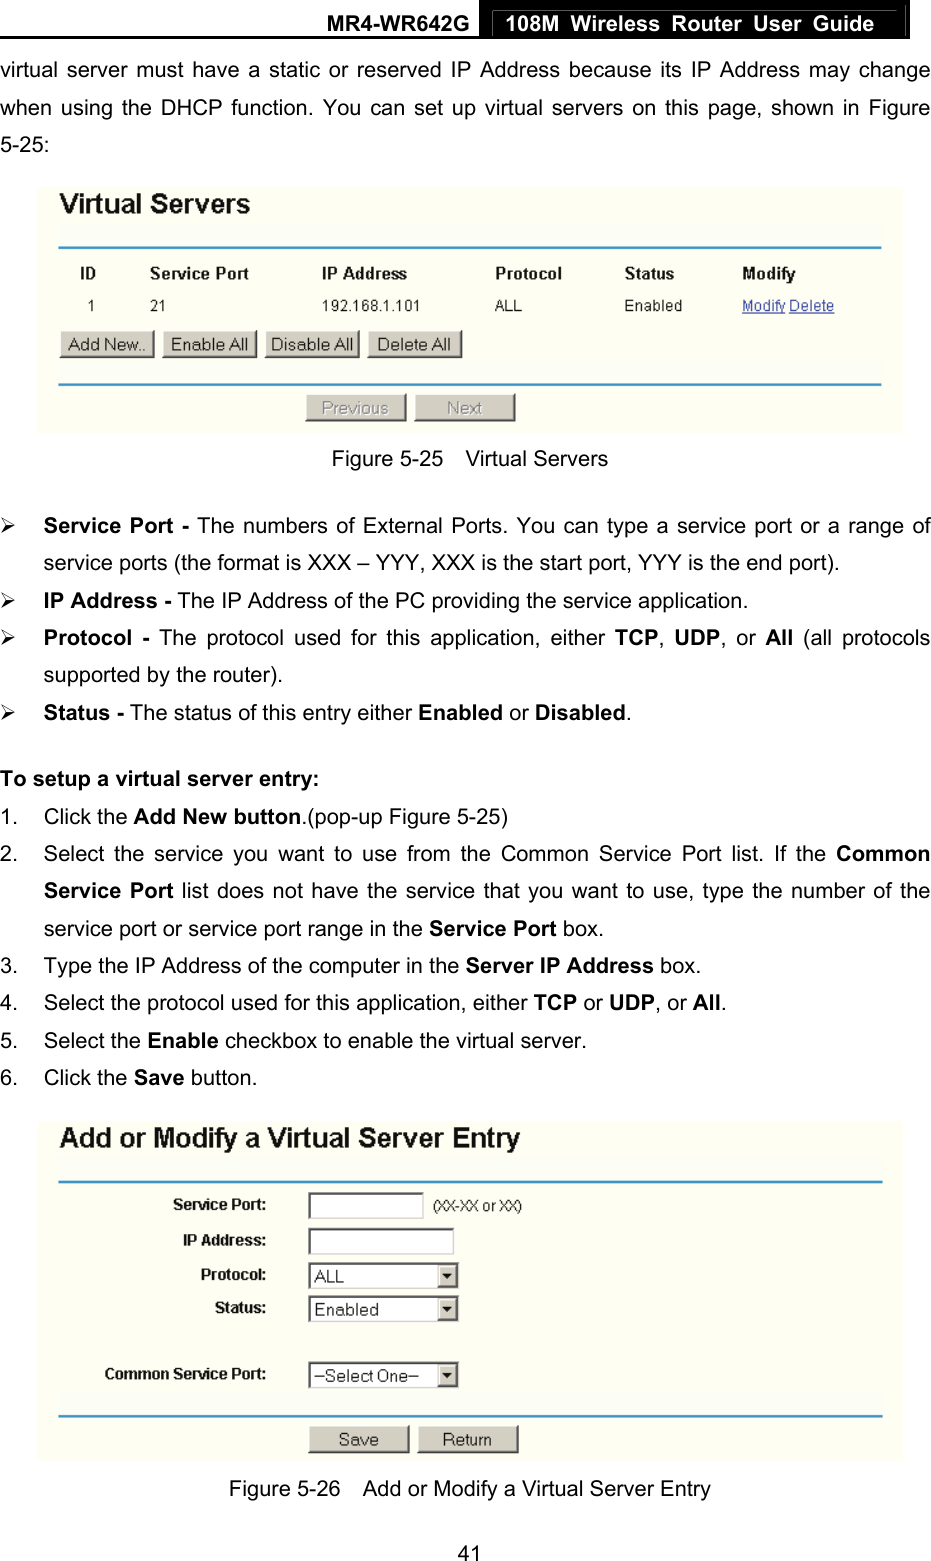 MR4-WR642G 108M Wireless Router User Guide   41virtual server must have a static or reserved IP Address because its IP Address may change when using the DHCP function. You can set up virtual servers on this page, shown in Figure 5-25:  Figure 5-25  Virtual Servers ¾ Service Port - The numbers of External Ports. You can type a service port or a range of service ports (the format is XXX – YYY, XXX is the start port, YYY is the end port).   ¾ IP Address - The IP Address of the PC providing the service application. ¾ Protocol - The protocol used for this application, either TCP,  UDP, or All  (all protocols supported by the router). ¾ Status - The status of this entry either Enabled or Disabled. To setup a virtual server entry:   1. Click the Add New button.(pop-up Figure 5-25) 2.  Select the service you want to use from the Common Service Port list. If the Common Service Port list does not have the service that you want to use, type the number of the service port or service port range in the Service Port box. 3.  Type the IP Address of the computer in the Server IP Address box.  4.  Select the protocol used for this application, either TCP or UDP, or All. 5. Select the Enable checkbox to enable the virtual server. 6. Click the Save button.    Figure 5-26    Add or Modify a Virtual Server Entry 